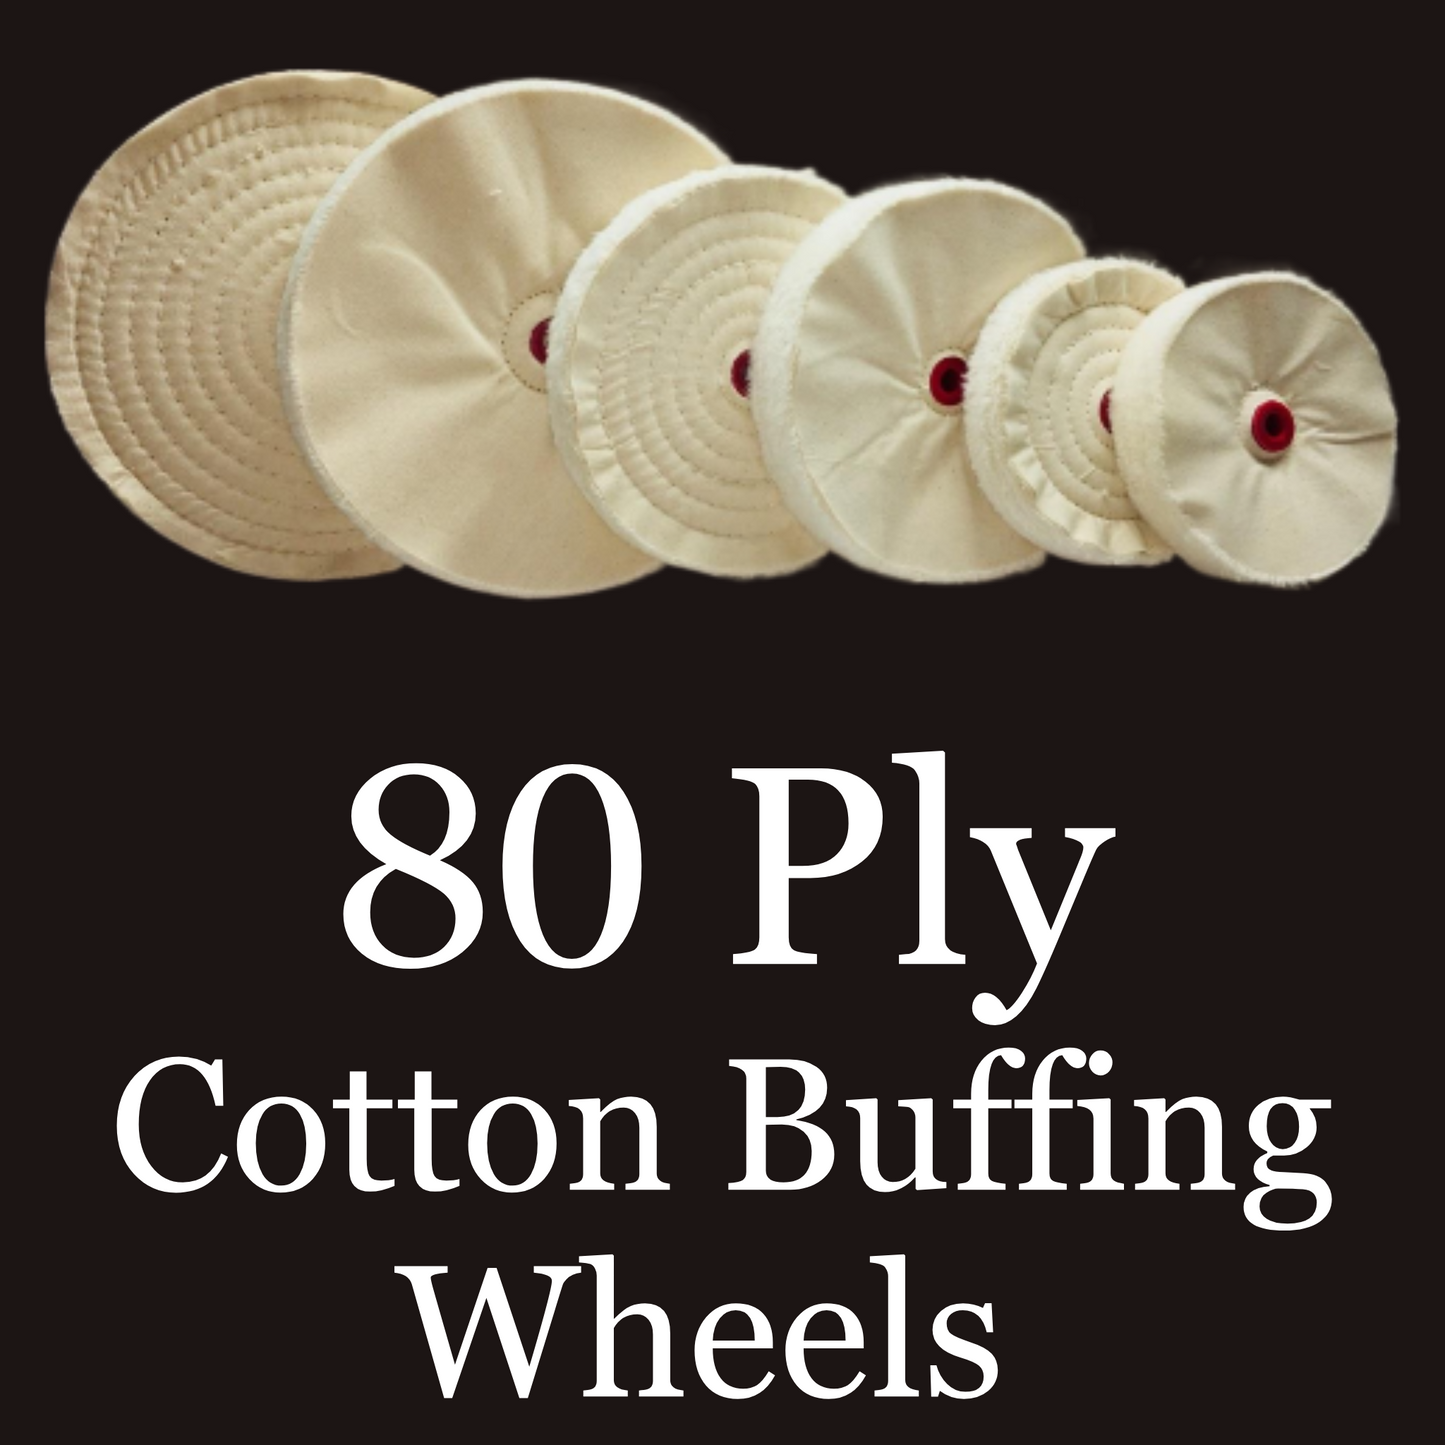 Loose Sewn Cotton Buffing Wheels 80 Ply